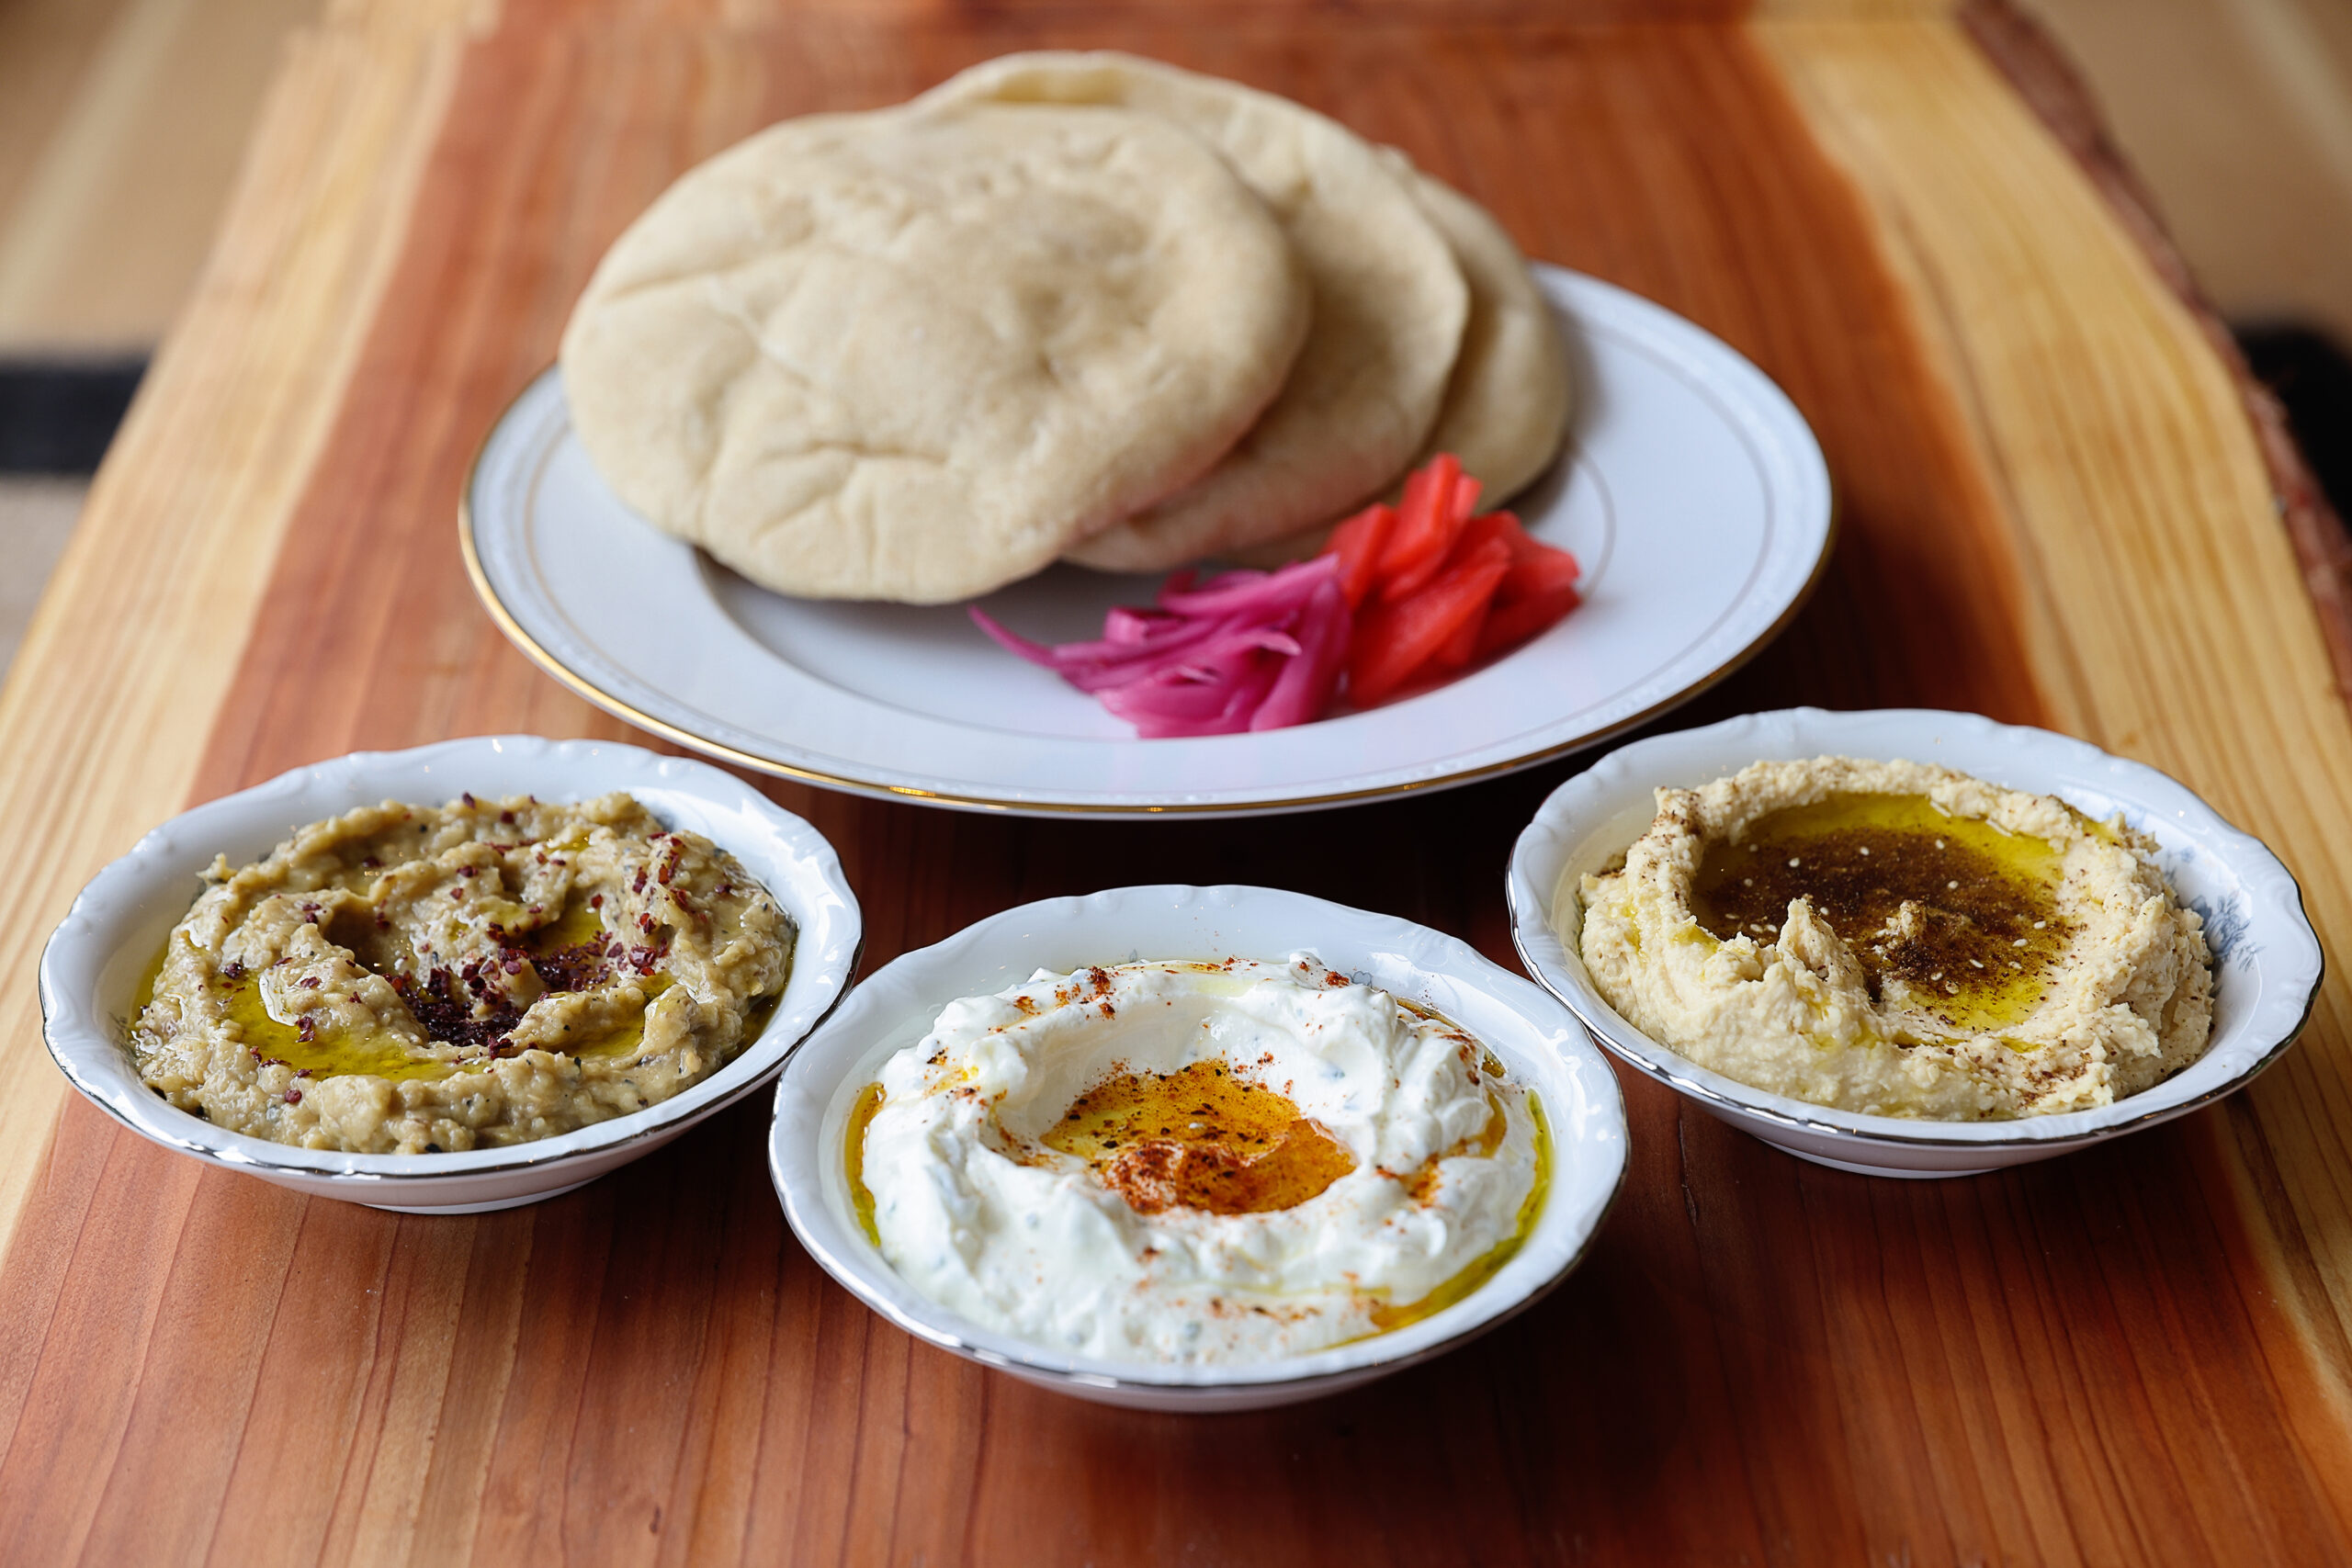 Route 1 Pita and Dip with pickled fresh vegetables, served with Chickpea Hummus with Za'atar, left, Seasoned Labneh with herbs & Baharat, and Baba Ghanoush with Sumac, at The Redwood in Sebastopol. (Christopher Chung/The Press Democrat)